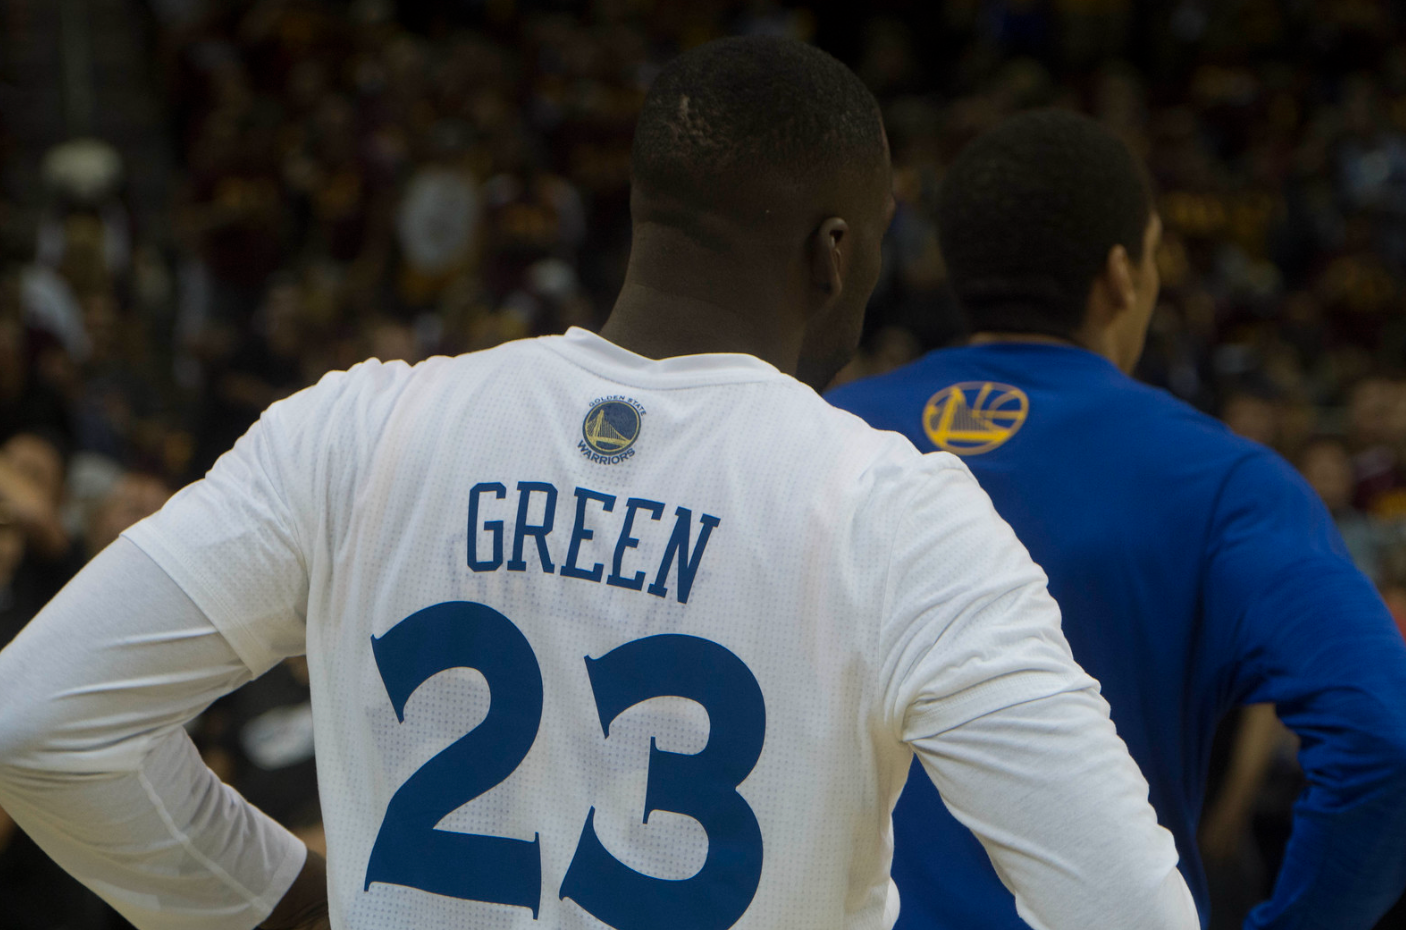 NBA suspends Warriors player Draymond Green after altercation with Minnesota Timberwolves player